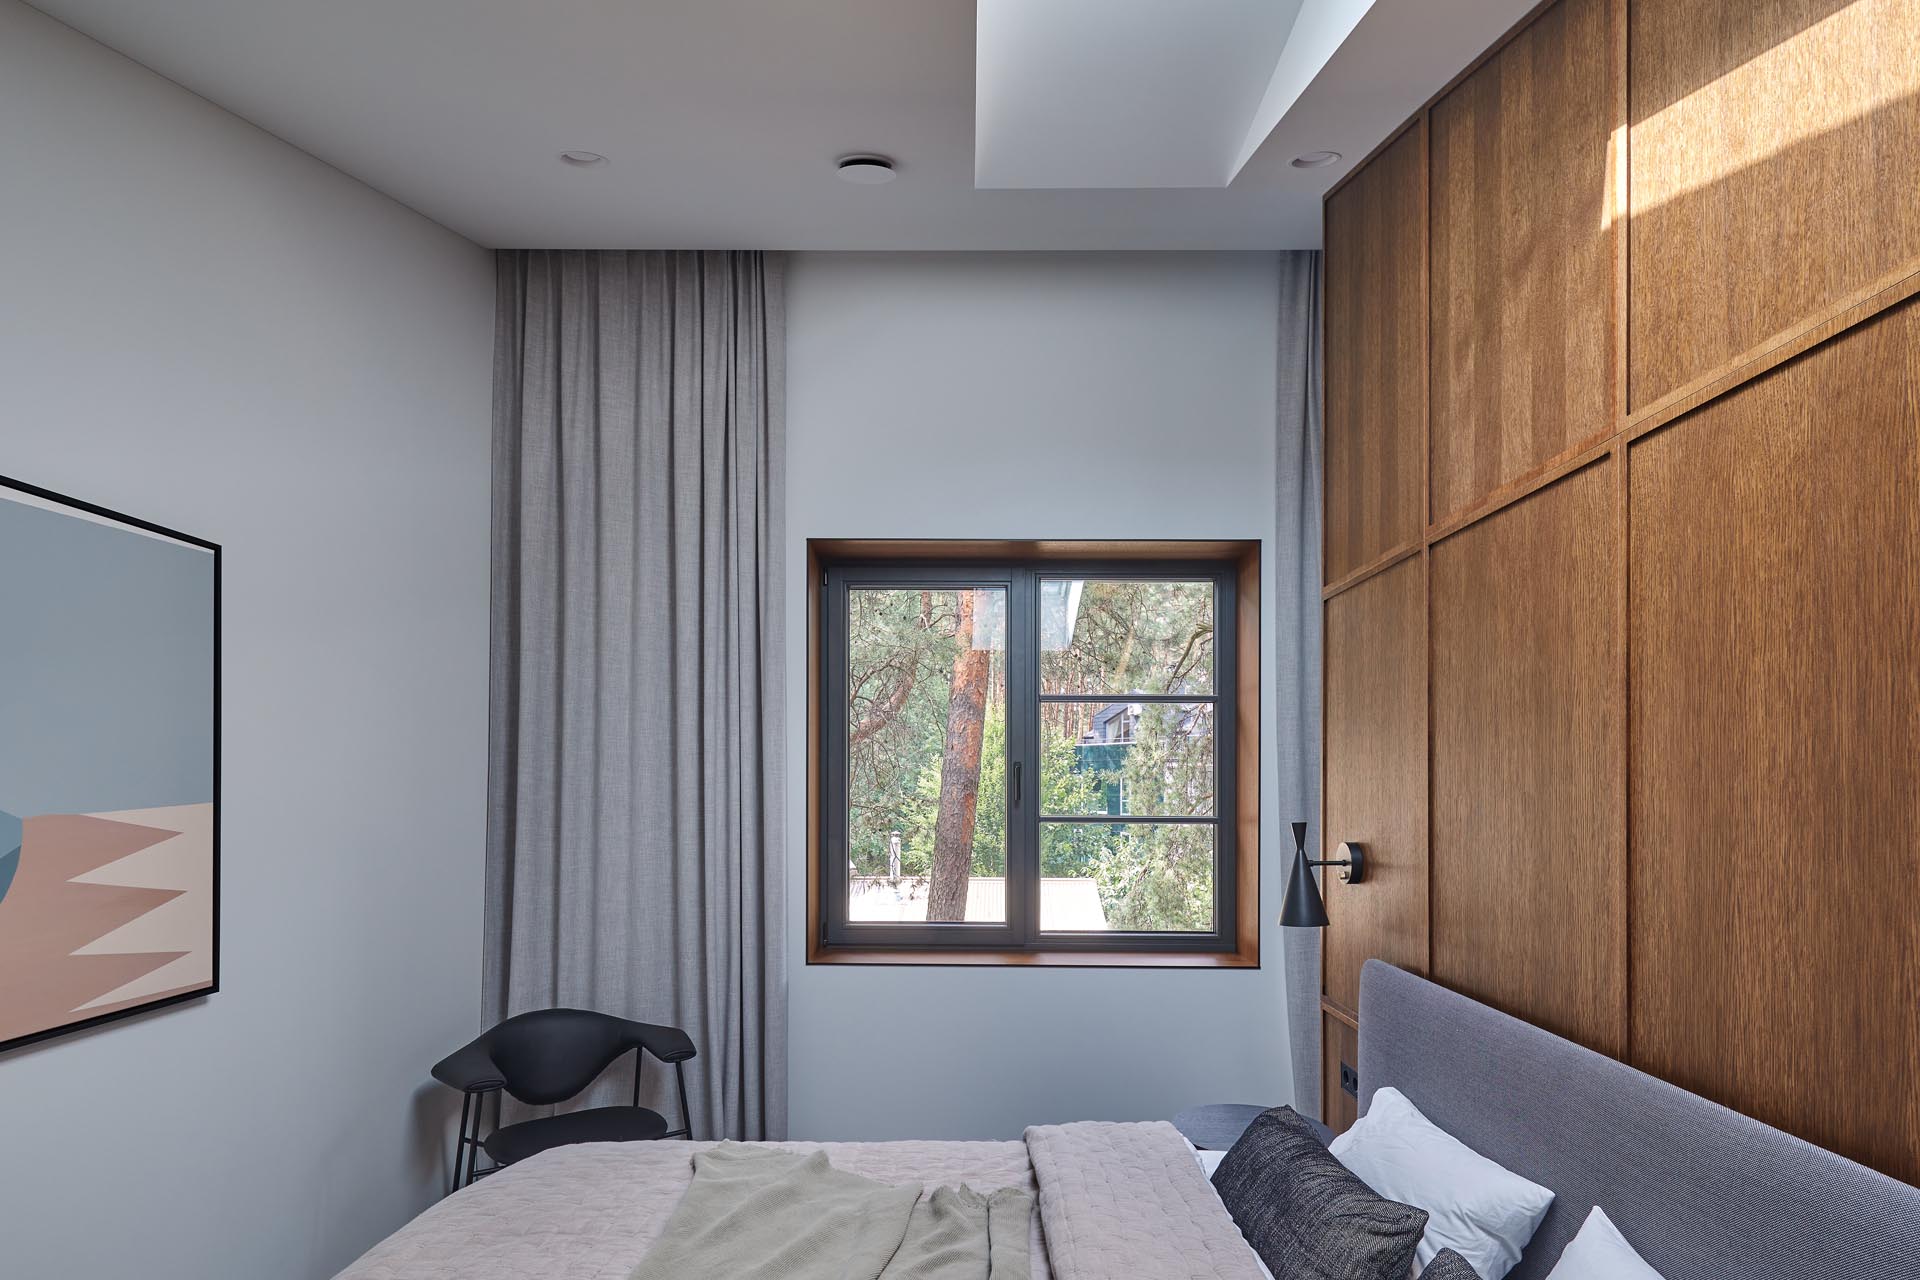 In is modern primary bedroom, there's yet another wood accent wall, this time, providing a backdrop for the gray upholstered bed, while the dark cabinetry of the wardrobe provides a contrasting element in the room.